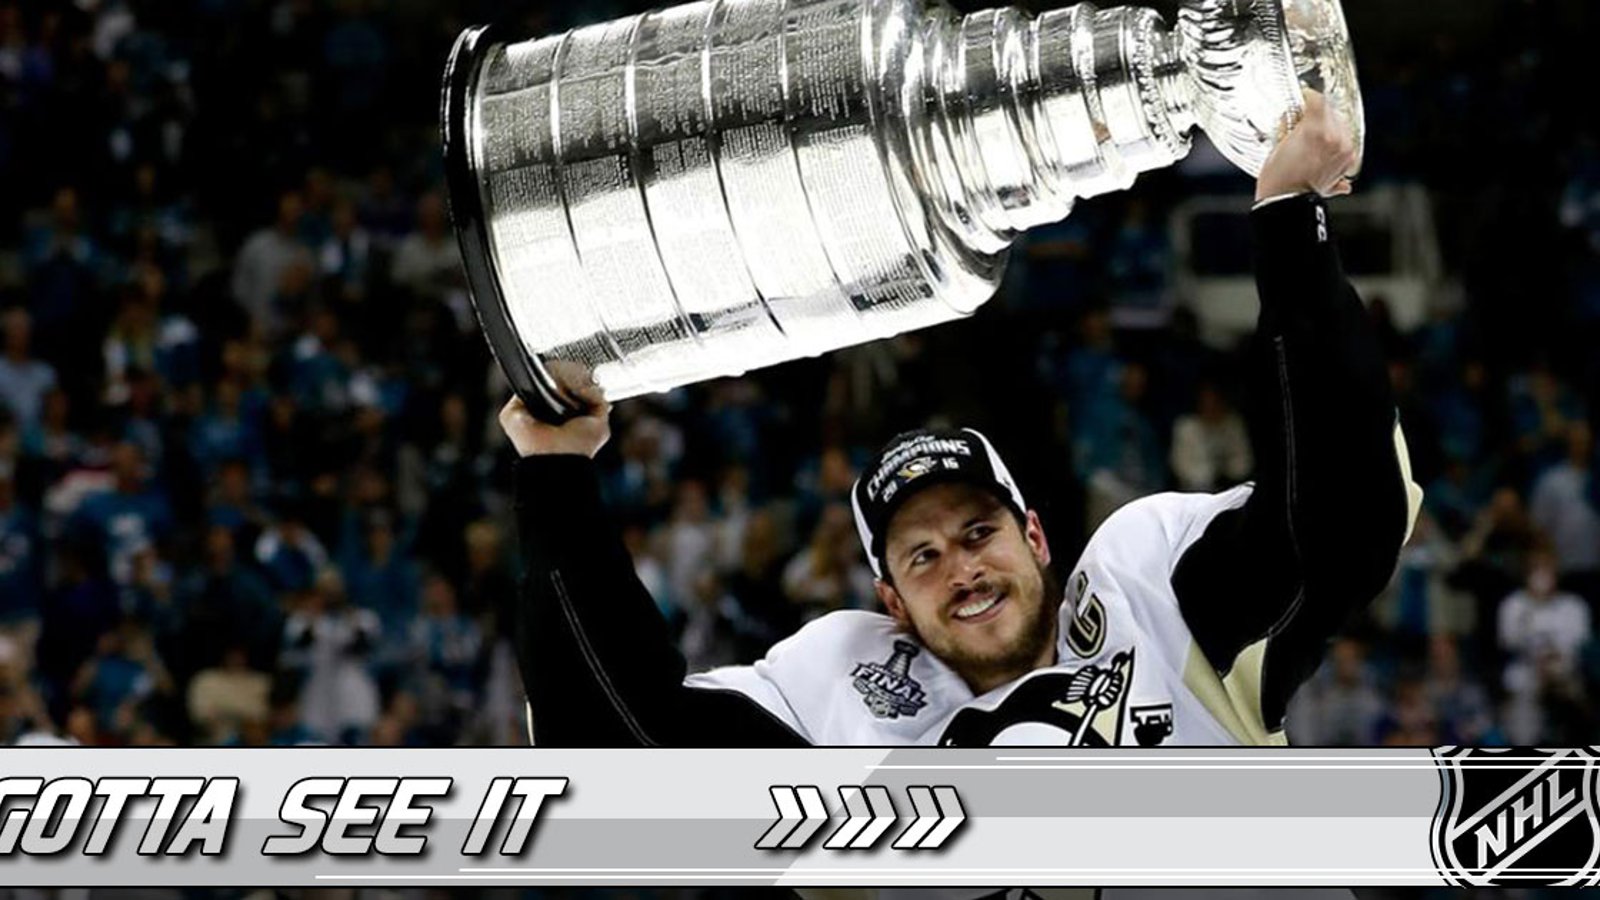 Gotta See It: NHL spells it out with incredible new Stanley Cup ad